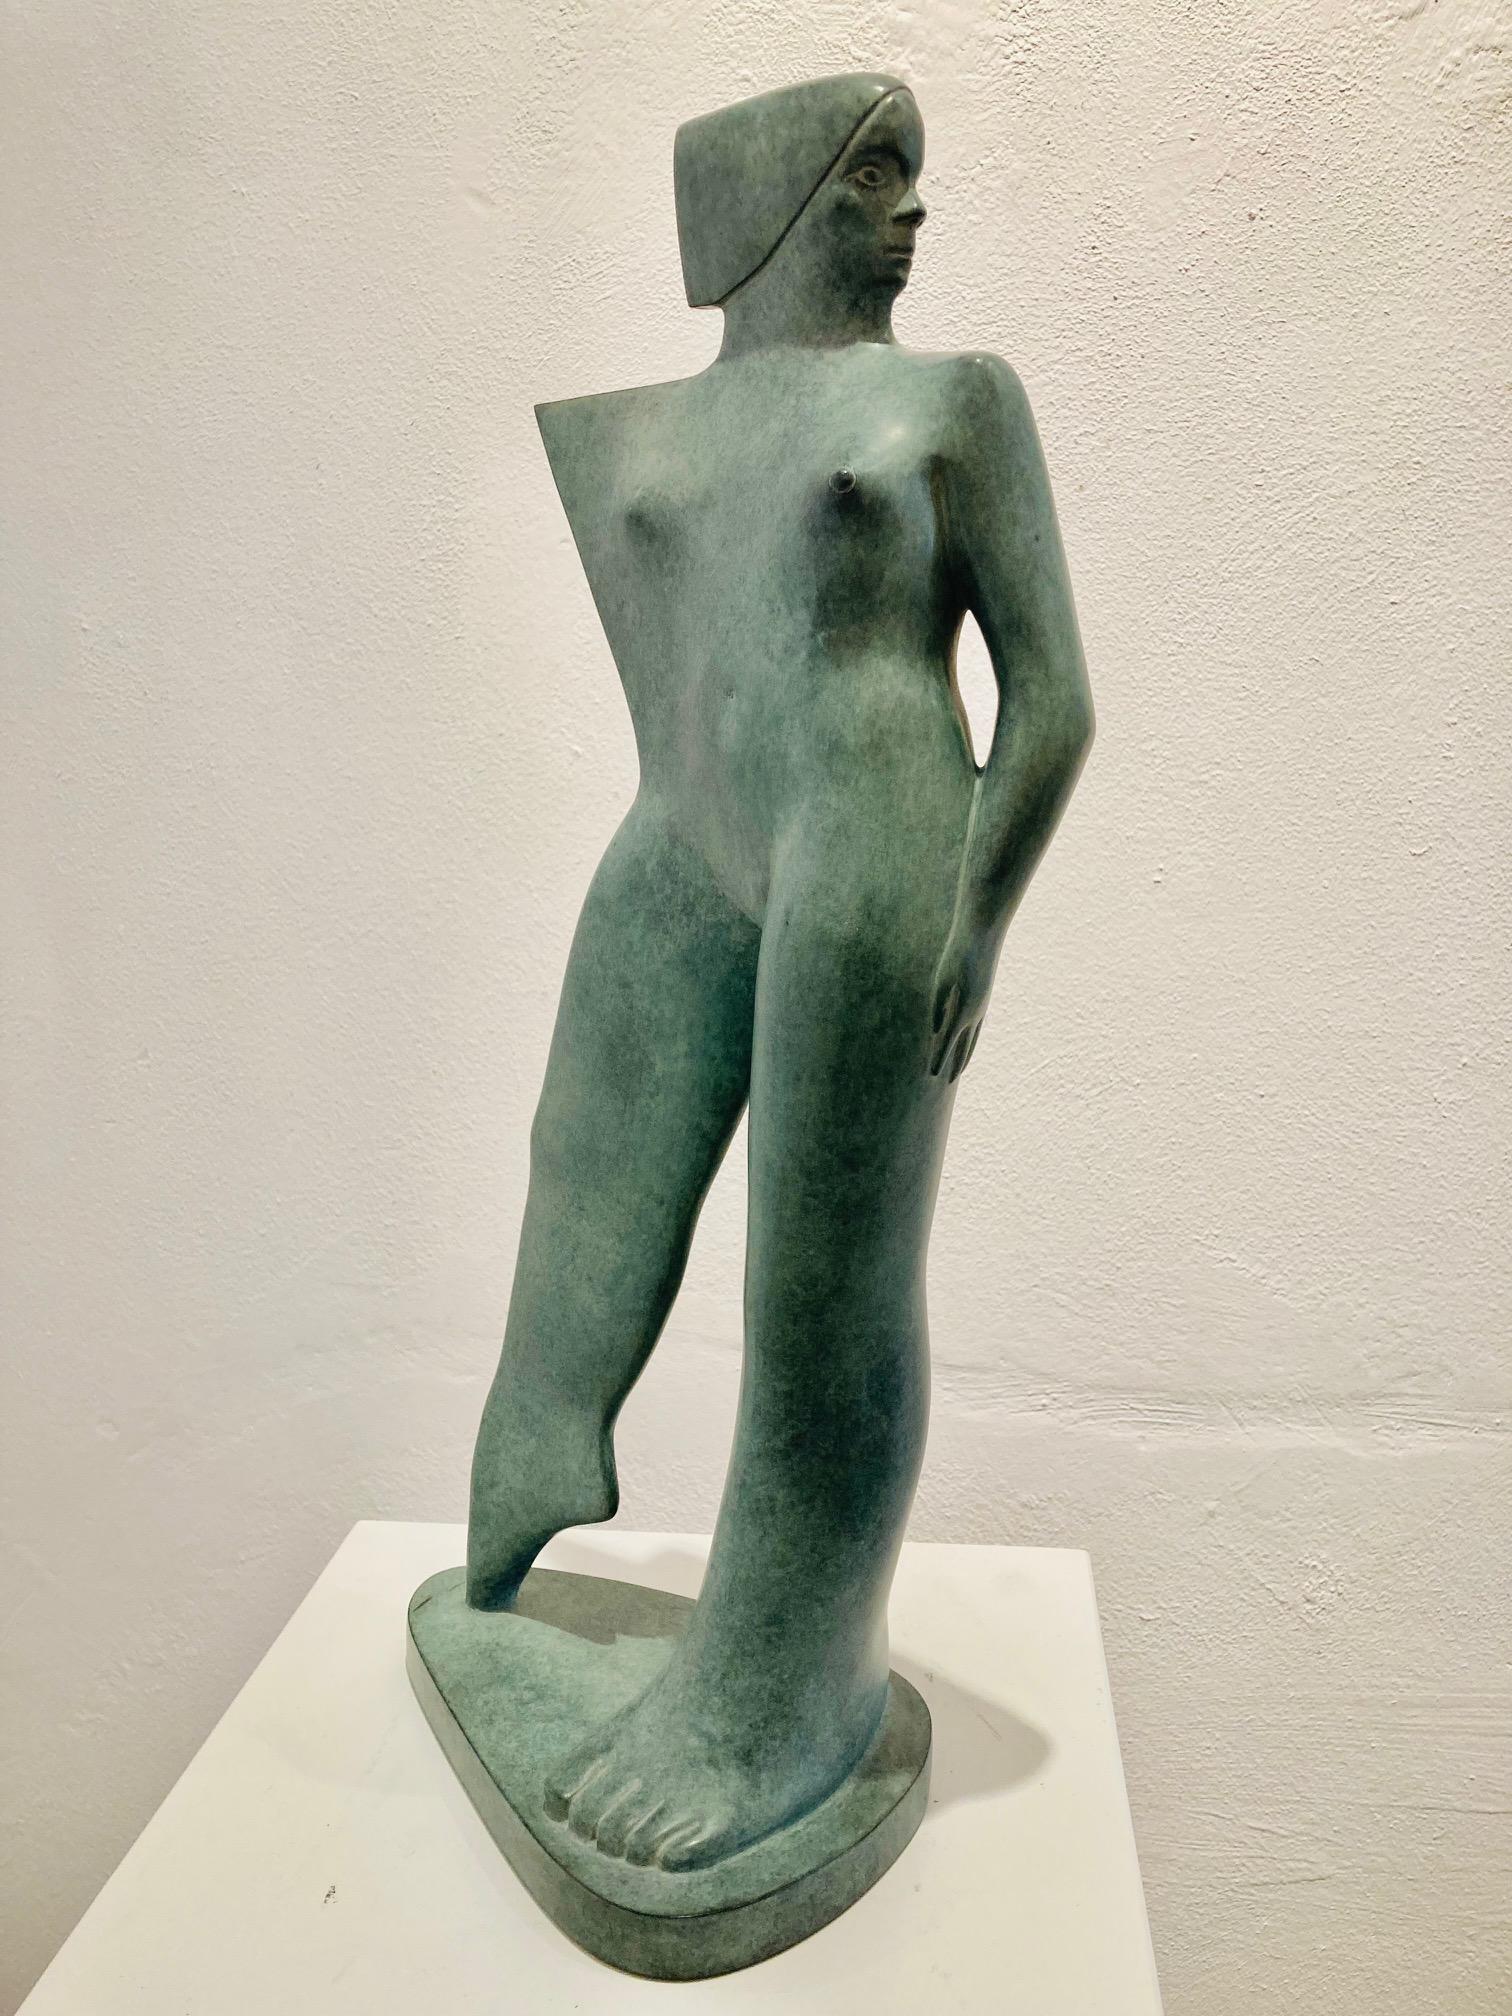 Donnina in Piedi Bronze Sculpture Standing Woman 
KOBE, pseudonym of Jacques Saelens, was a Belgian artist (Kortrijk, Belgium 1950 – Saint-Julien (Var), France 2014).

He combined the broad with sophistication. Two themes dominated his artworks: the